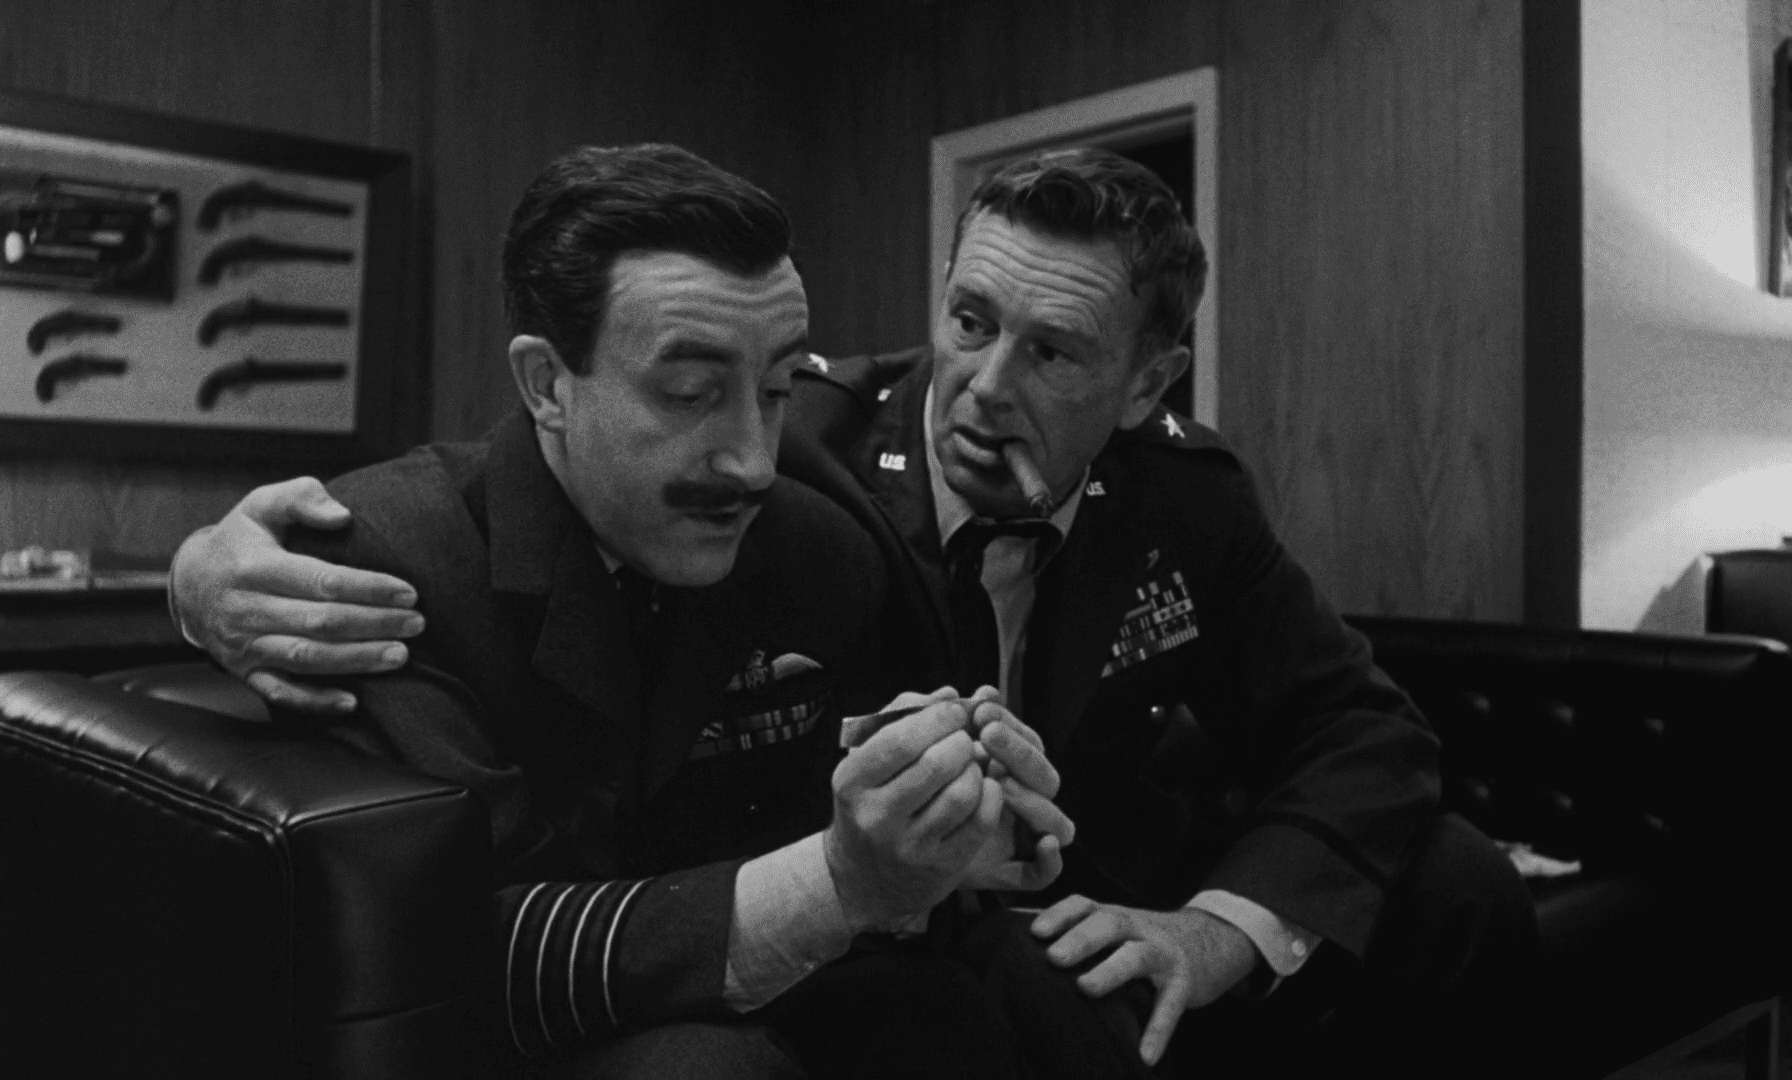 Dr. Strangelove: Or How I Learned to Stop Worrying and Love the Bomb